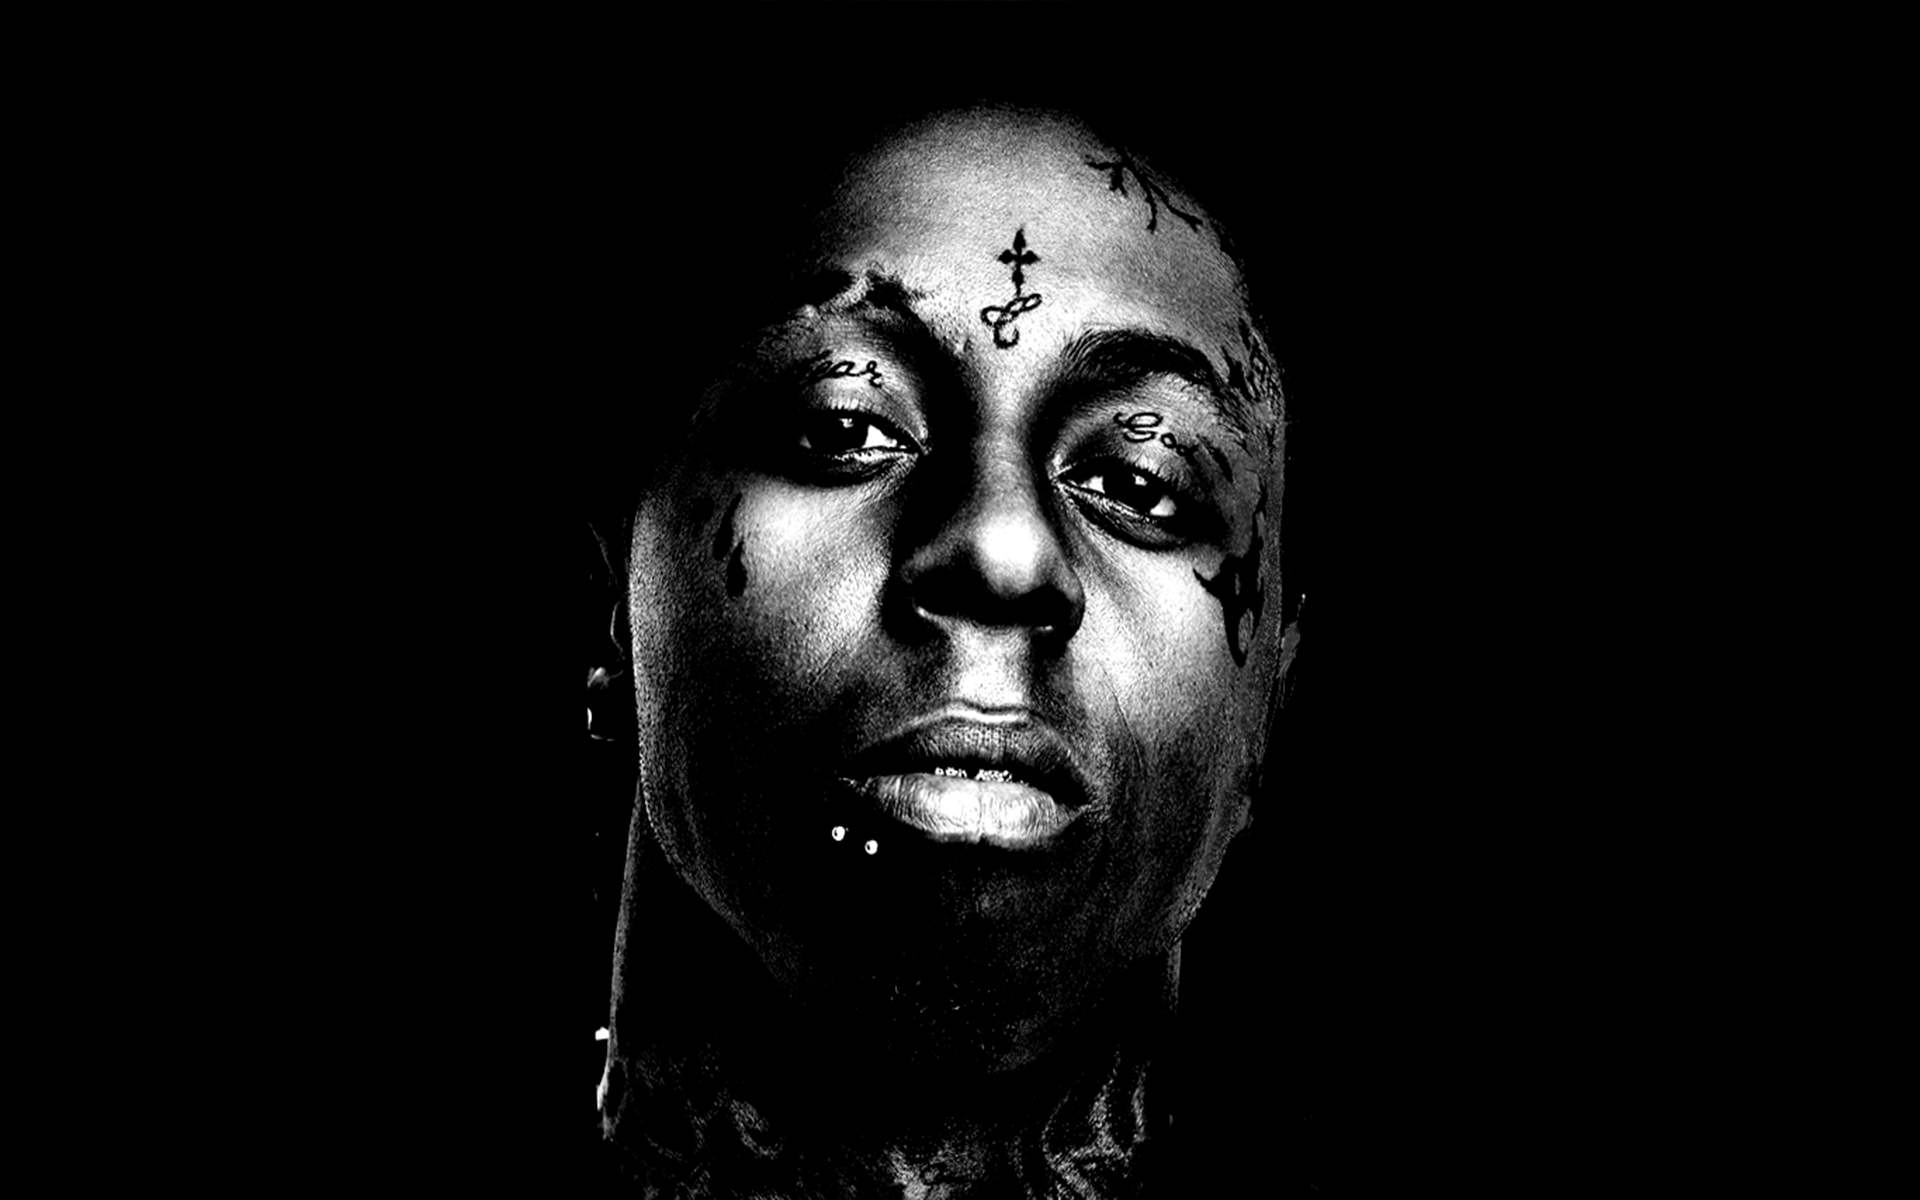 Lil Wayne Free Wallpapers - Wallpaper, High Definition, High Quality, Widescreen